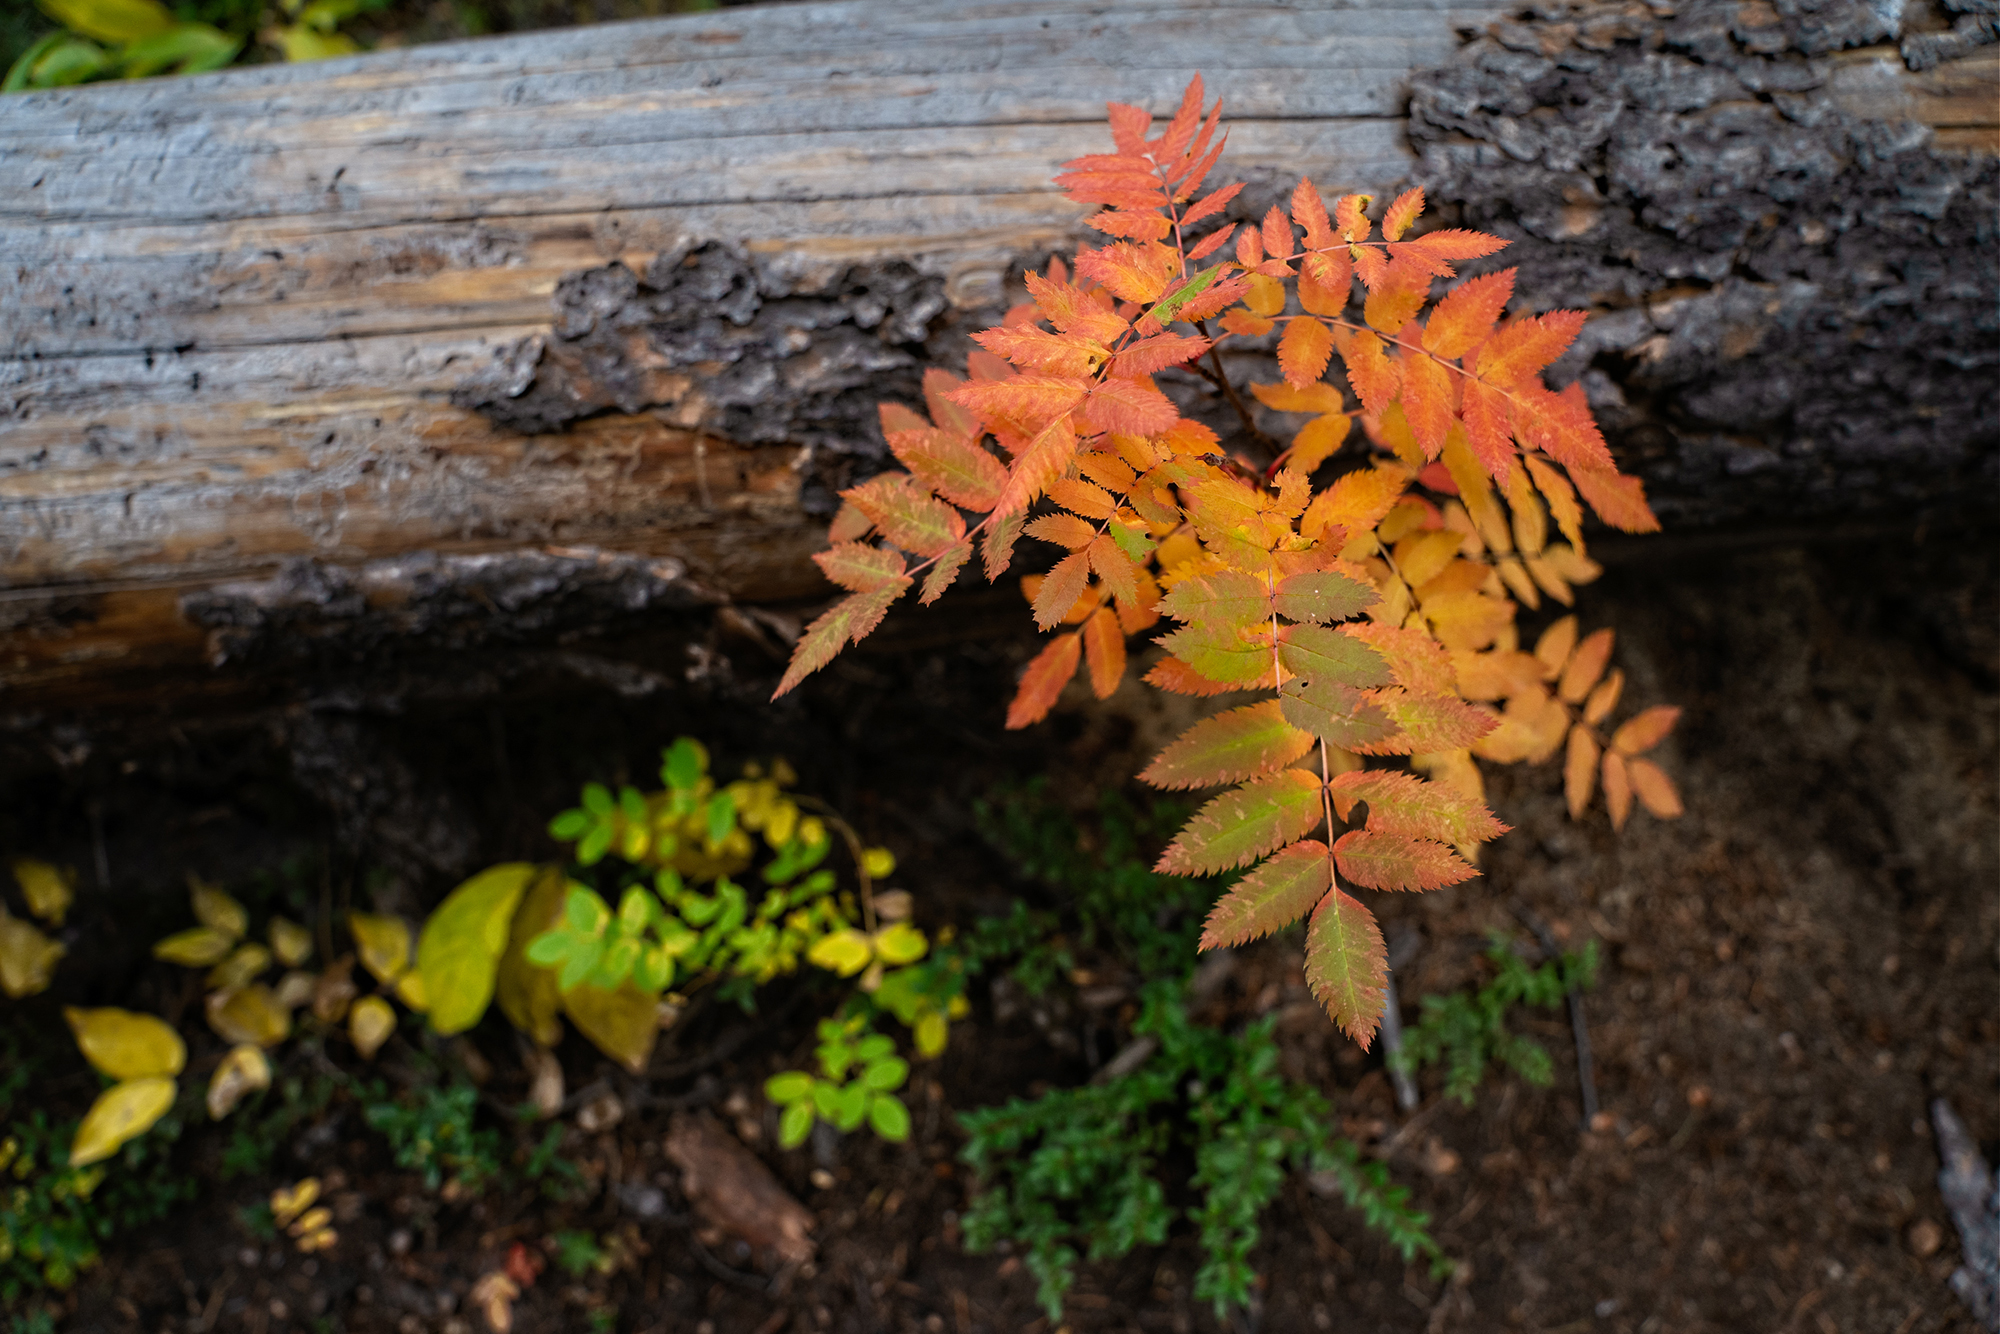 Detailed focus of red-orange leafy plant, next to large log and other small plants